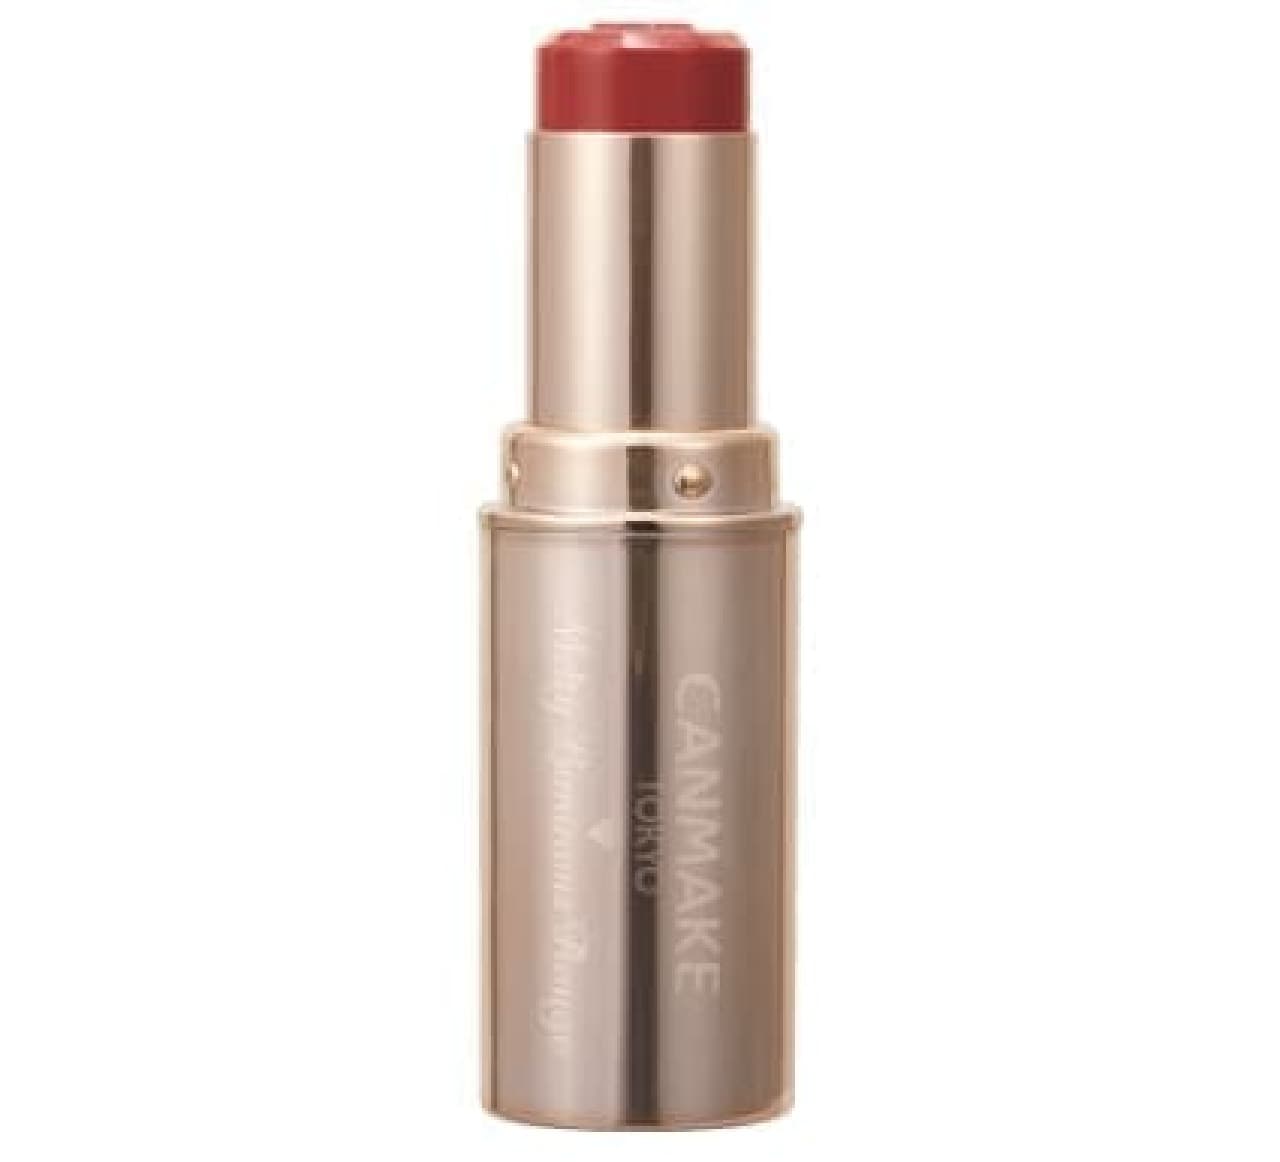 Canmake "Melty Luminous Rouge"